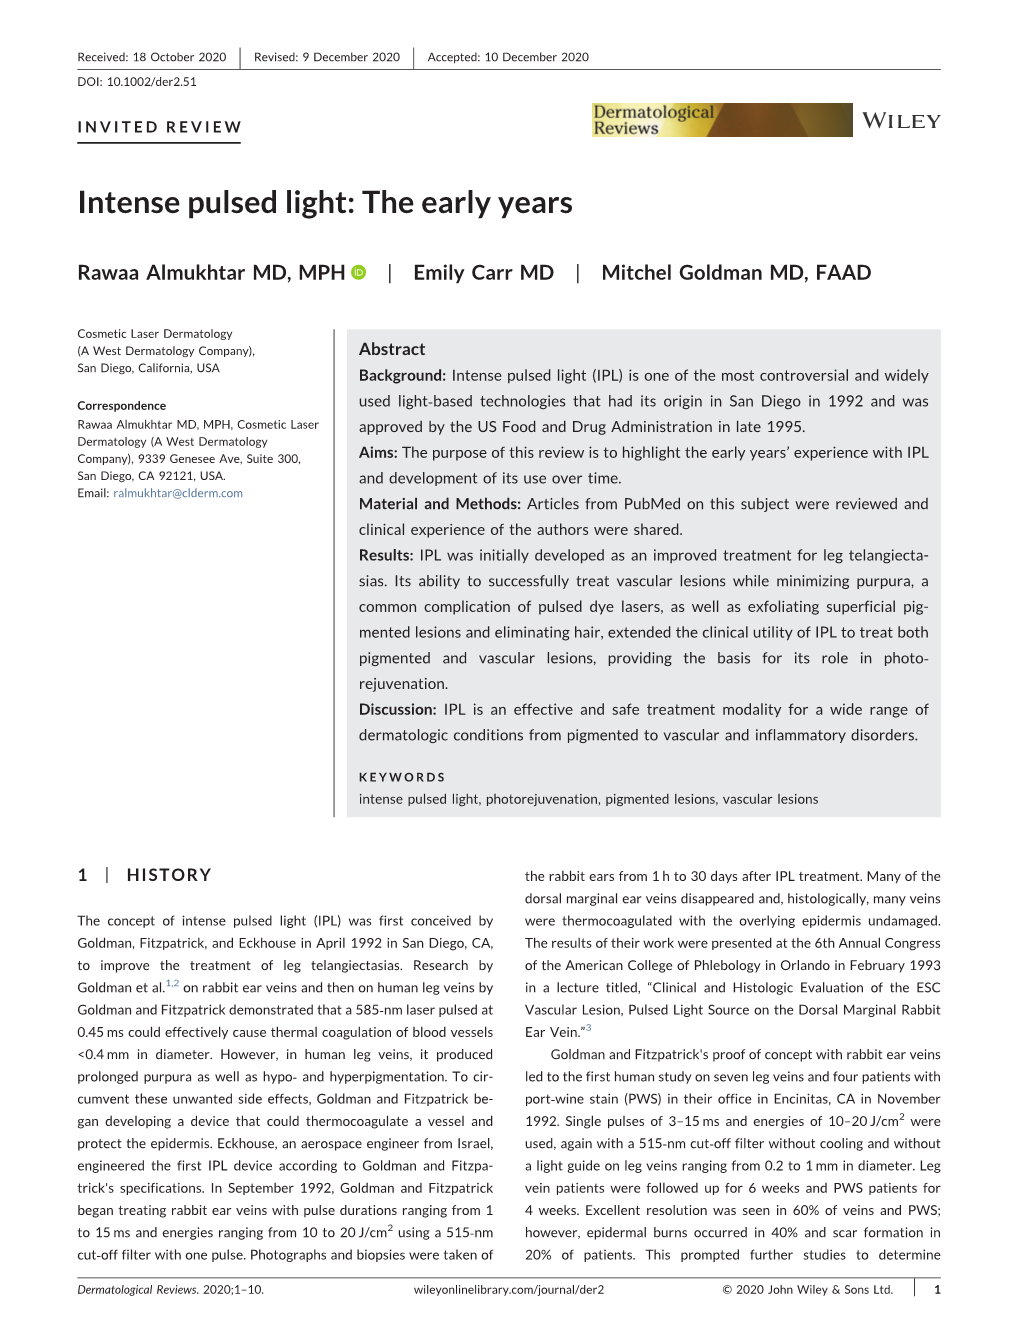 Intense Pulsed Light: the Early Years